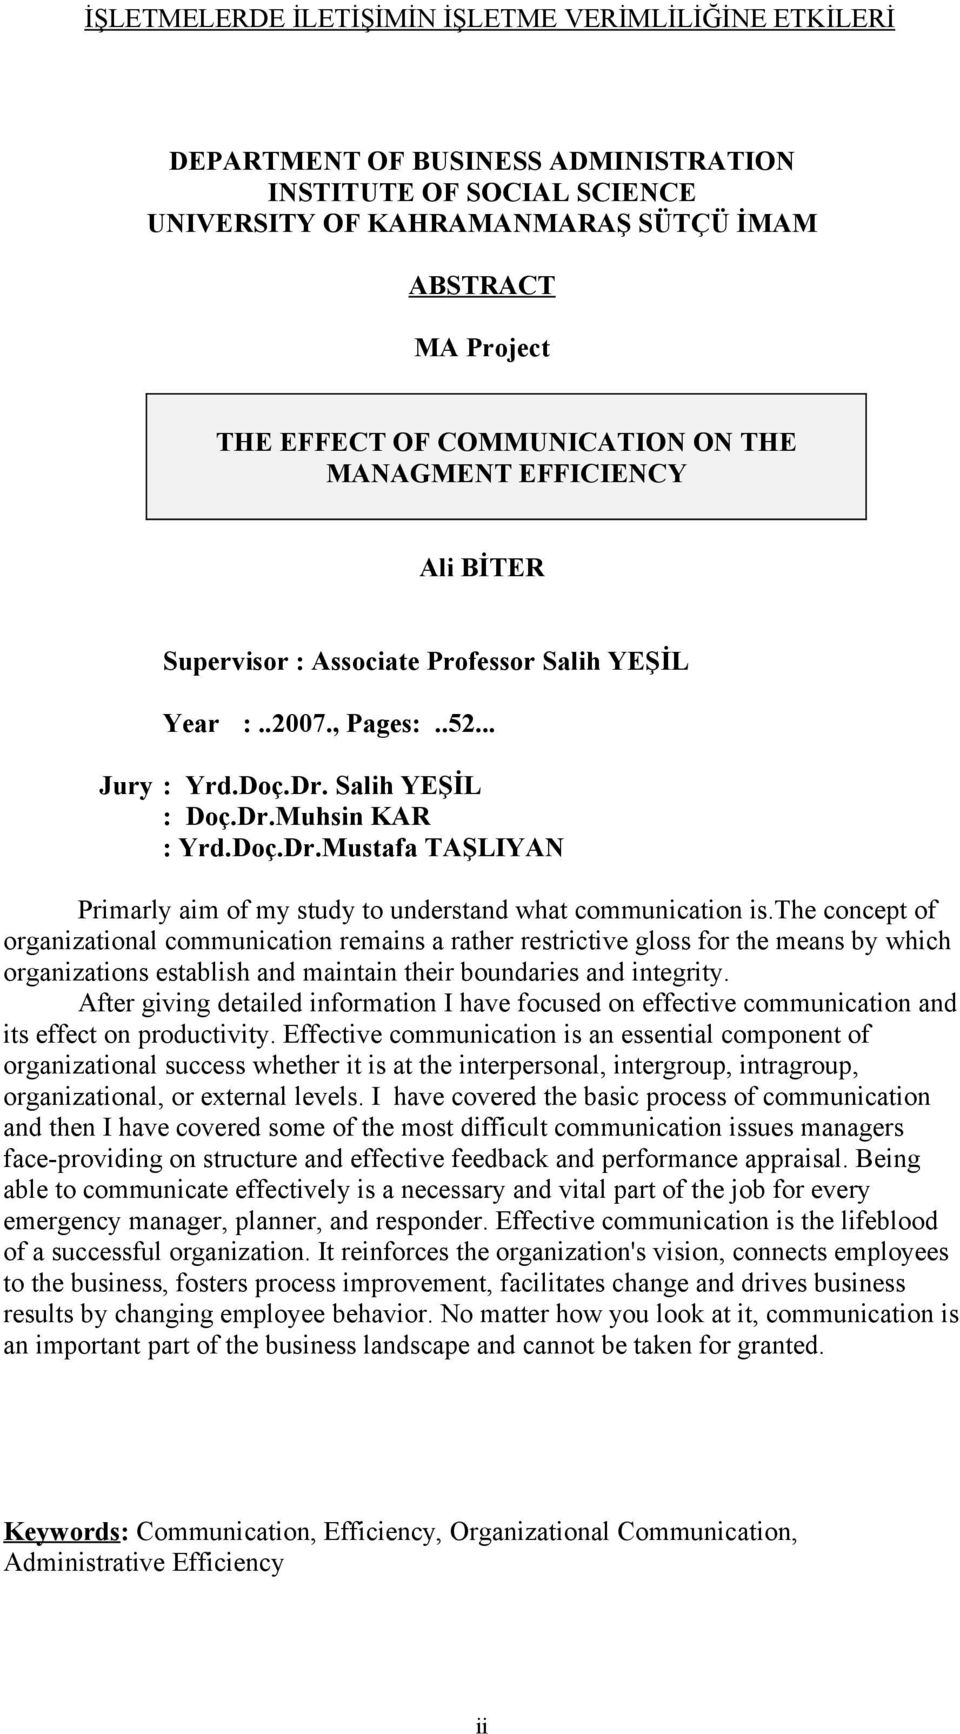 the concept of organizational communication remains a rather restrictive gloss for the means by which organizations establish and maintain their boundaries and integrity.